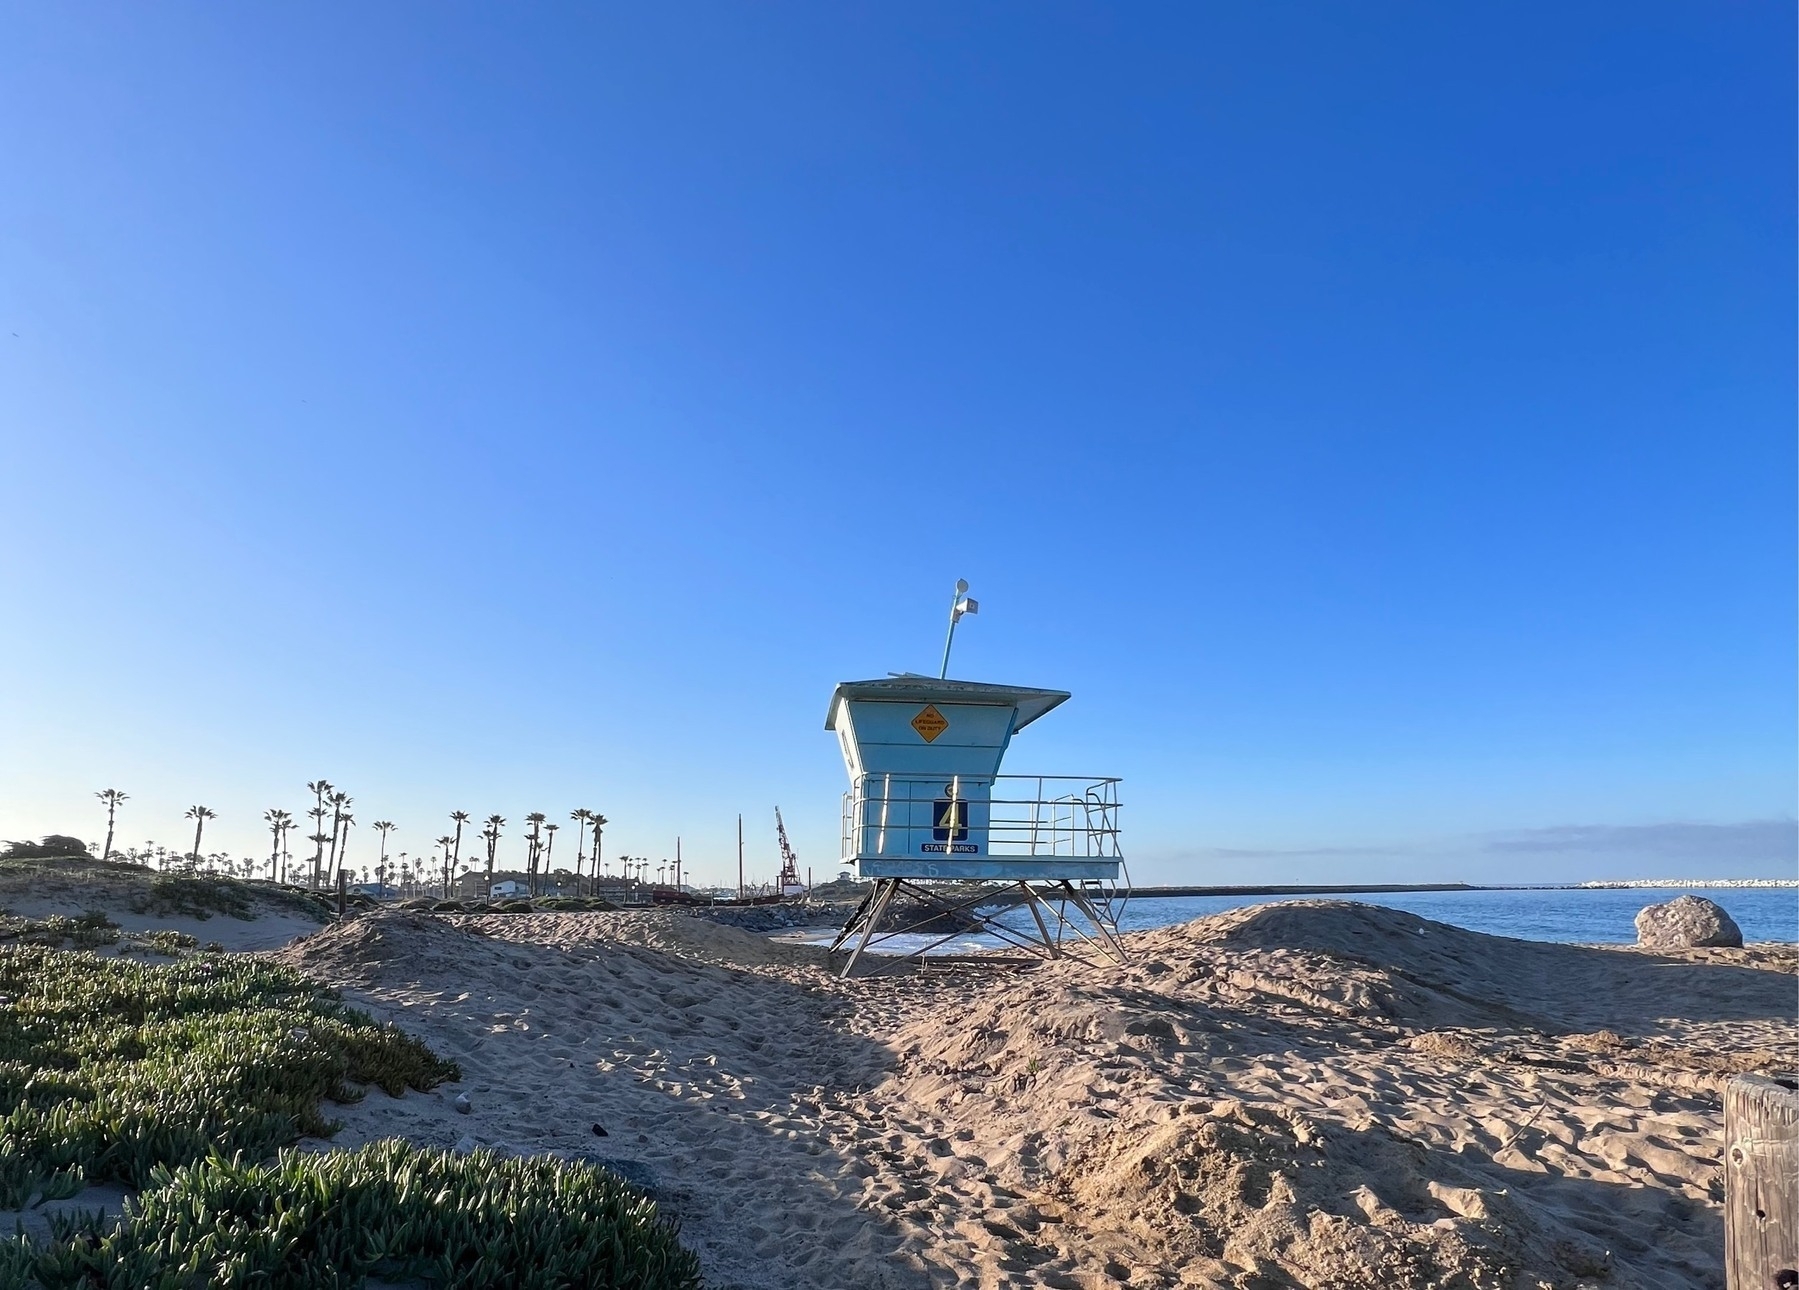 Beach with an empty teal lifeguard tower in the mid ground. 